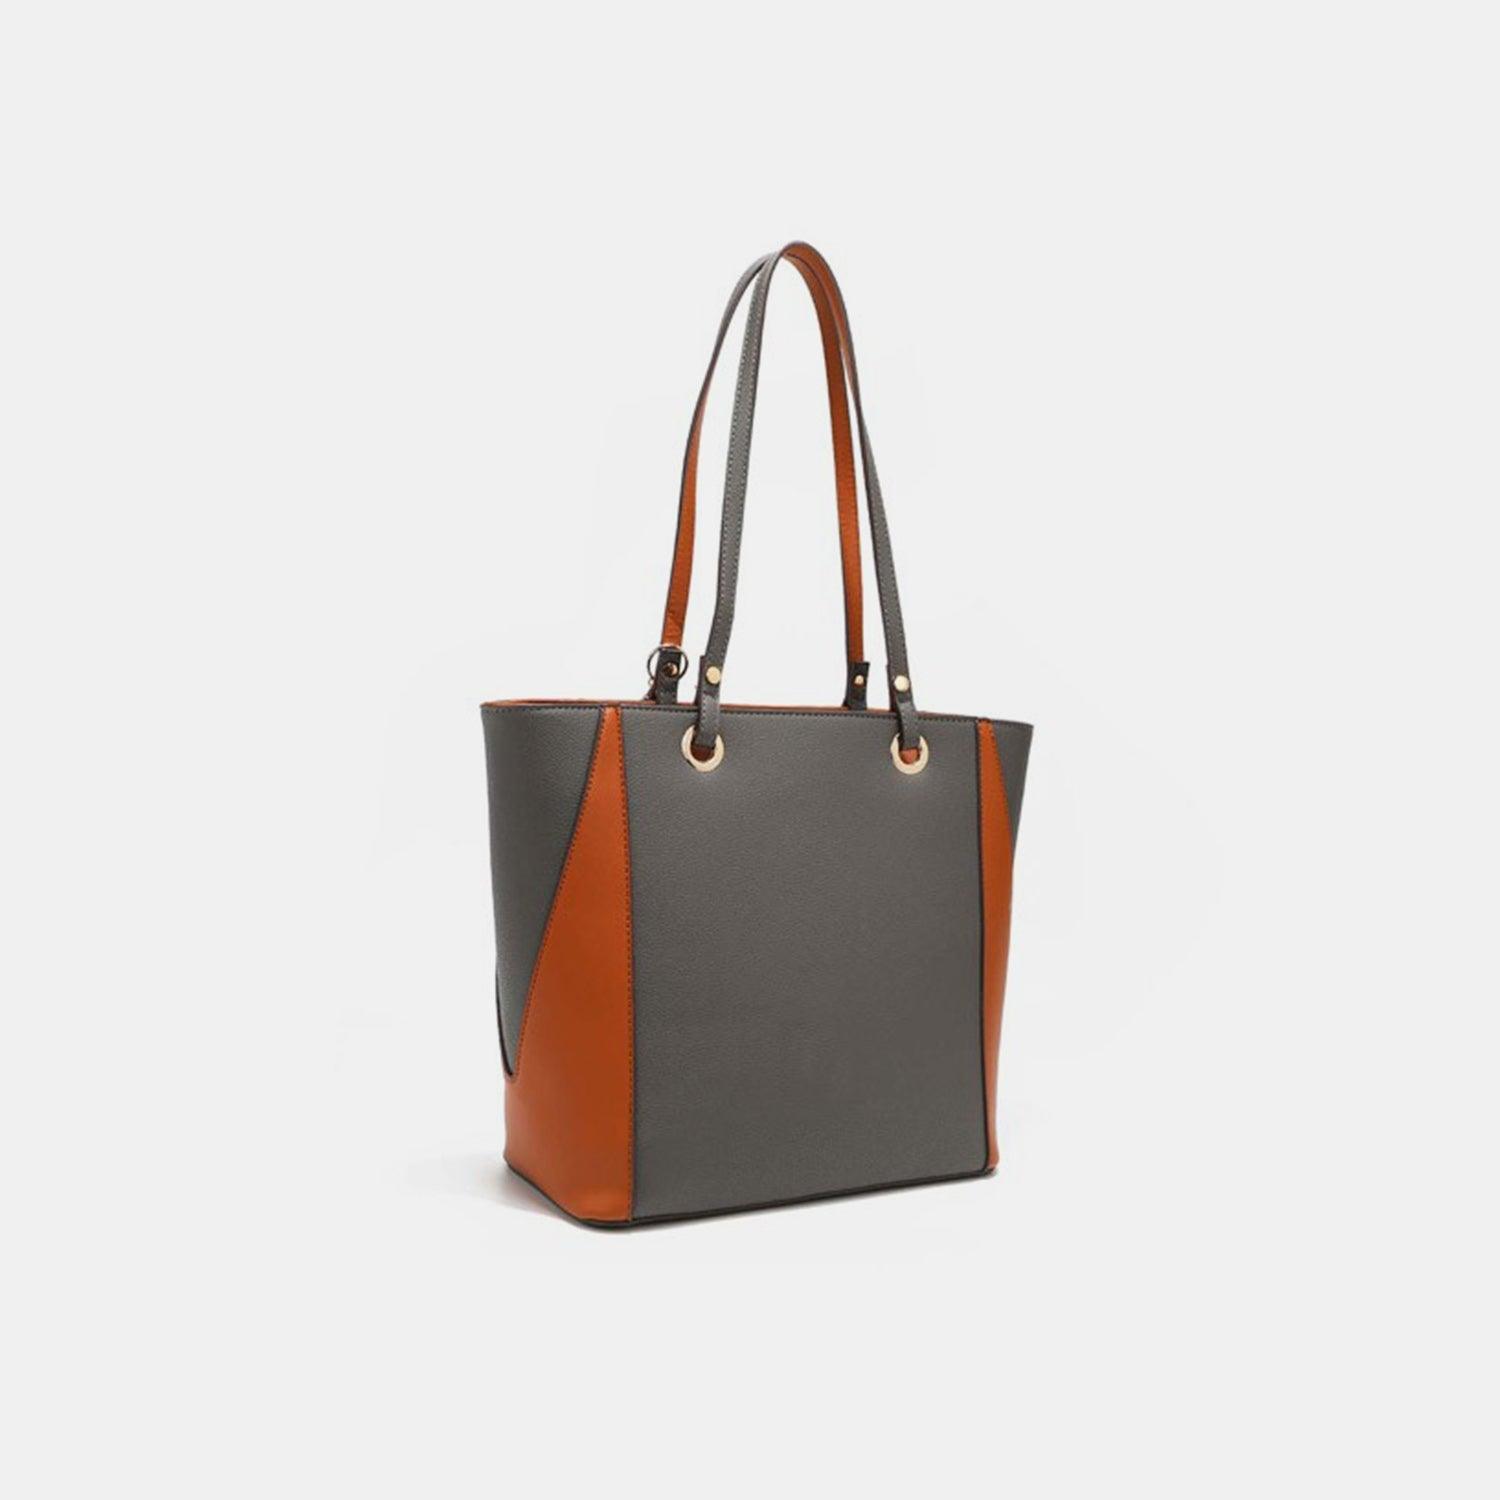 a grey and orange tote bag on a white background